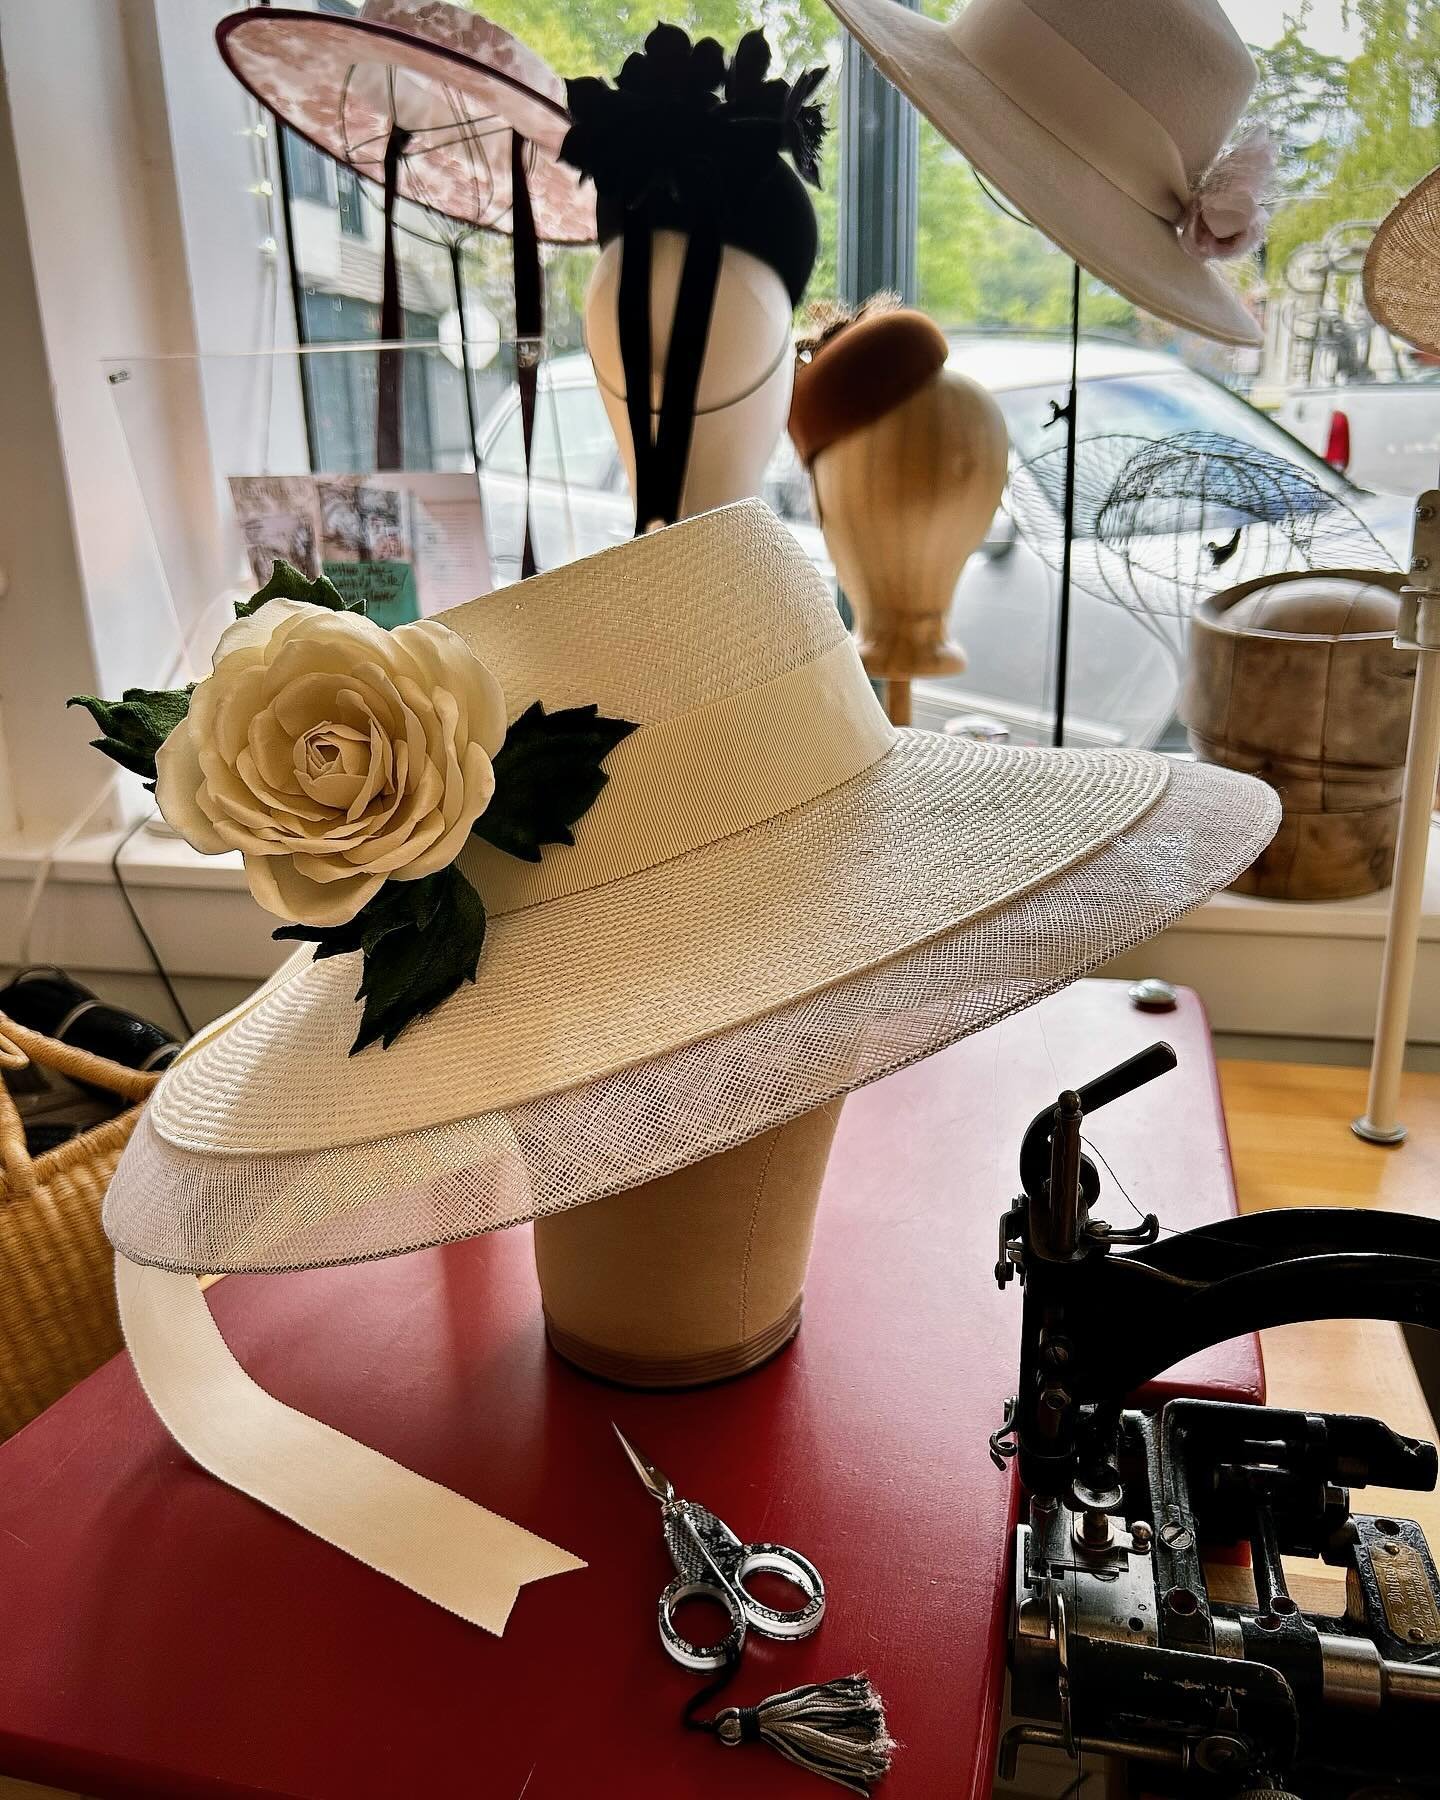 2024 Kentucky Derby custom order. Run for the roses with your own handmade silk and velvet rose on a one of a kind made to order hat. @milliners_guild #shopmarin #shopsananselmo #kentuckyderbyhats